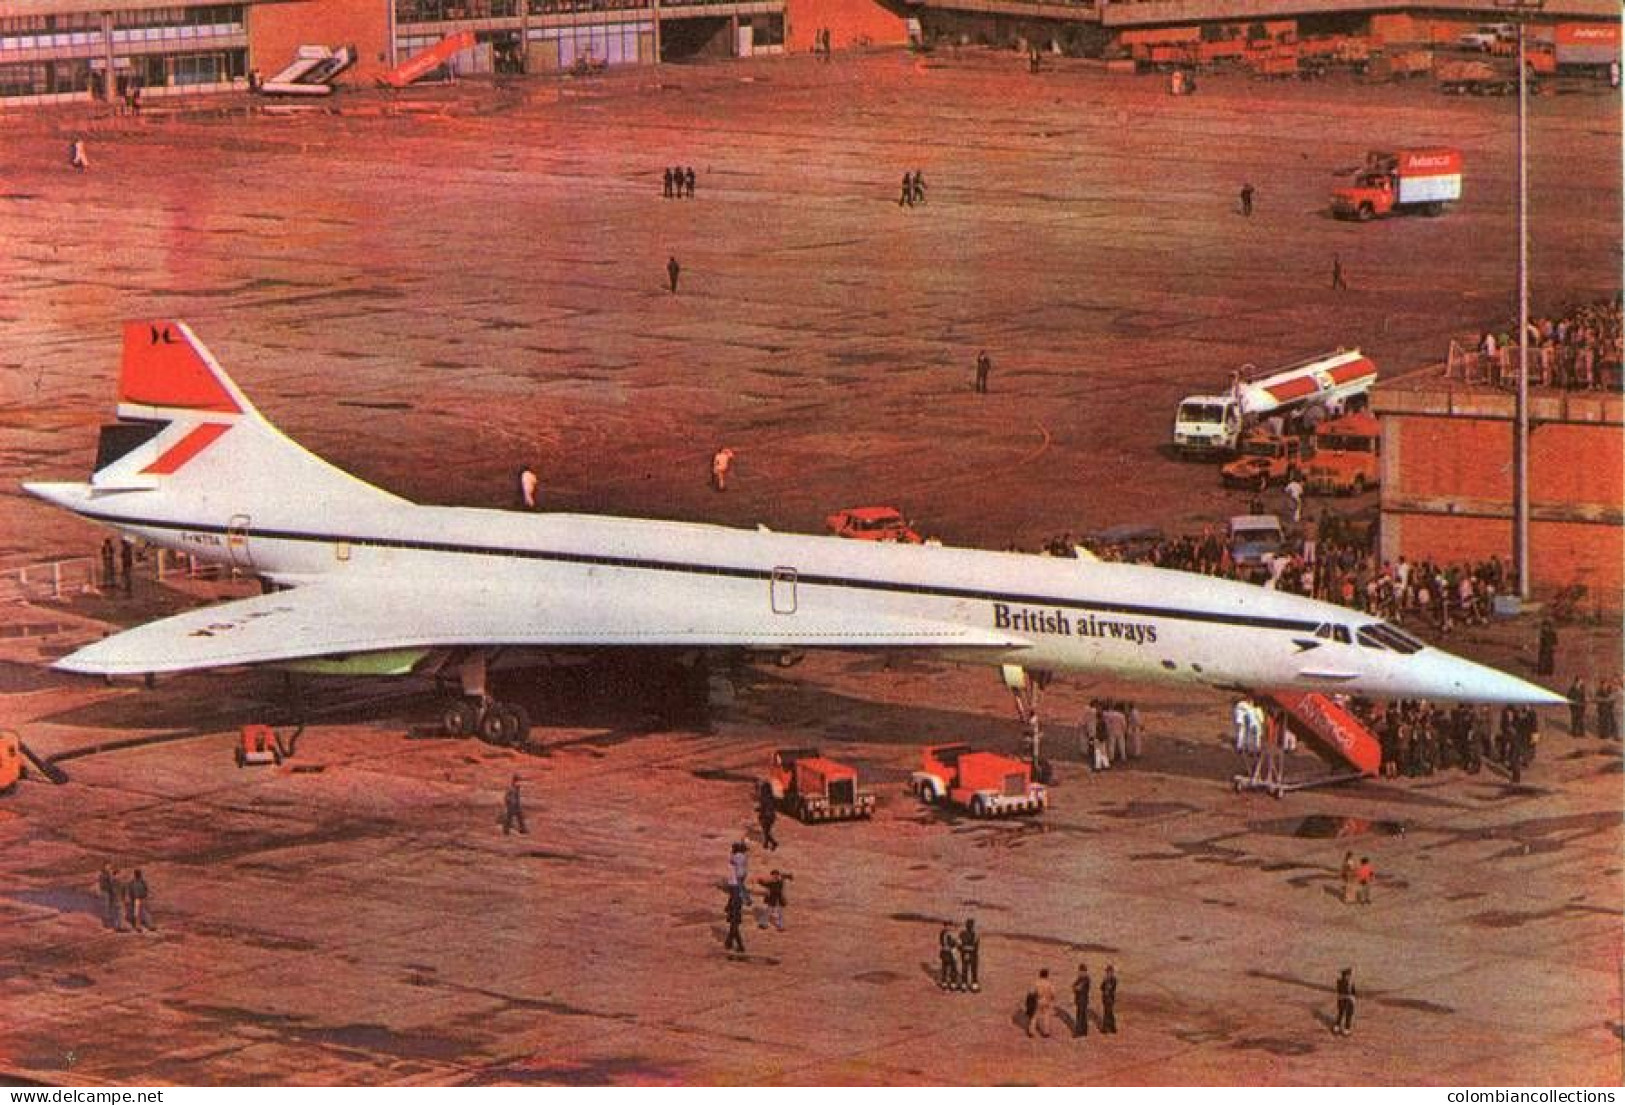 Lote PEP1644, Colombia, Postal Postcard, British Airways, Concorde, F-WTSA-7, Aviation, Plane, Old Card Not Perfect Card - Colombia